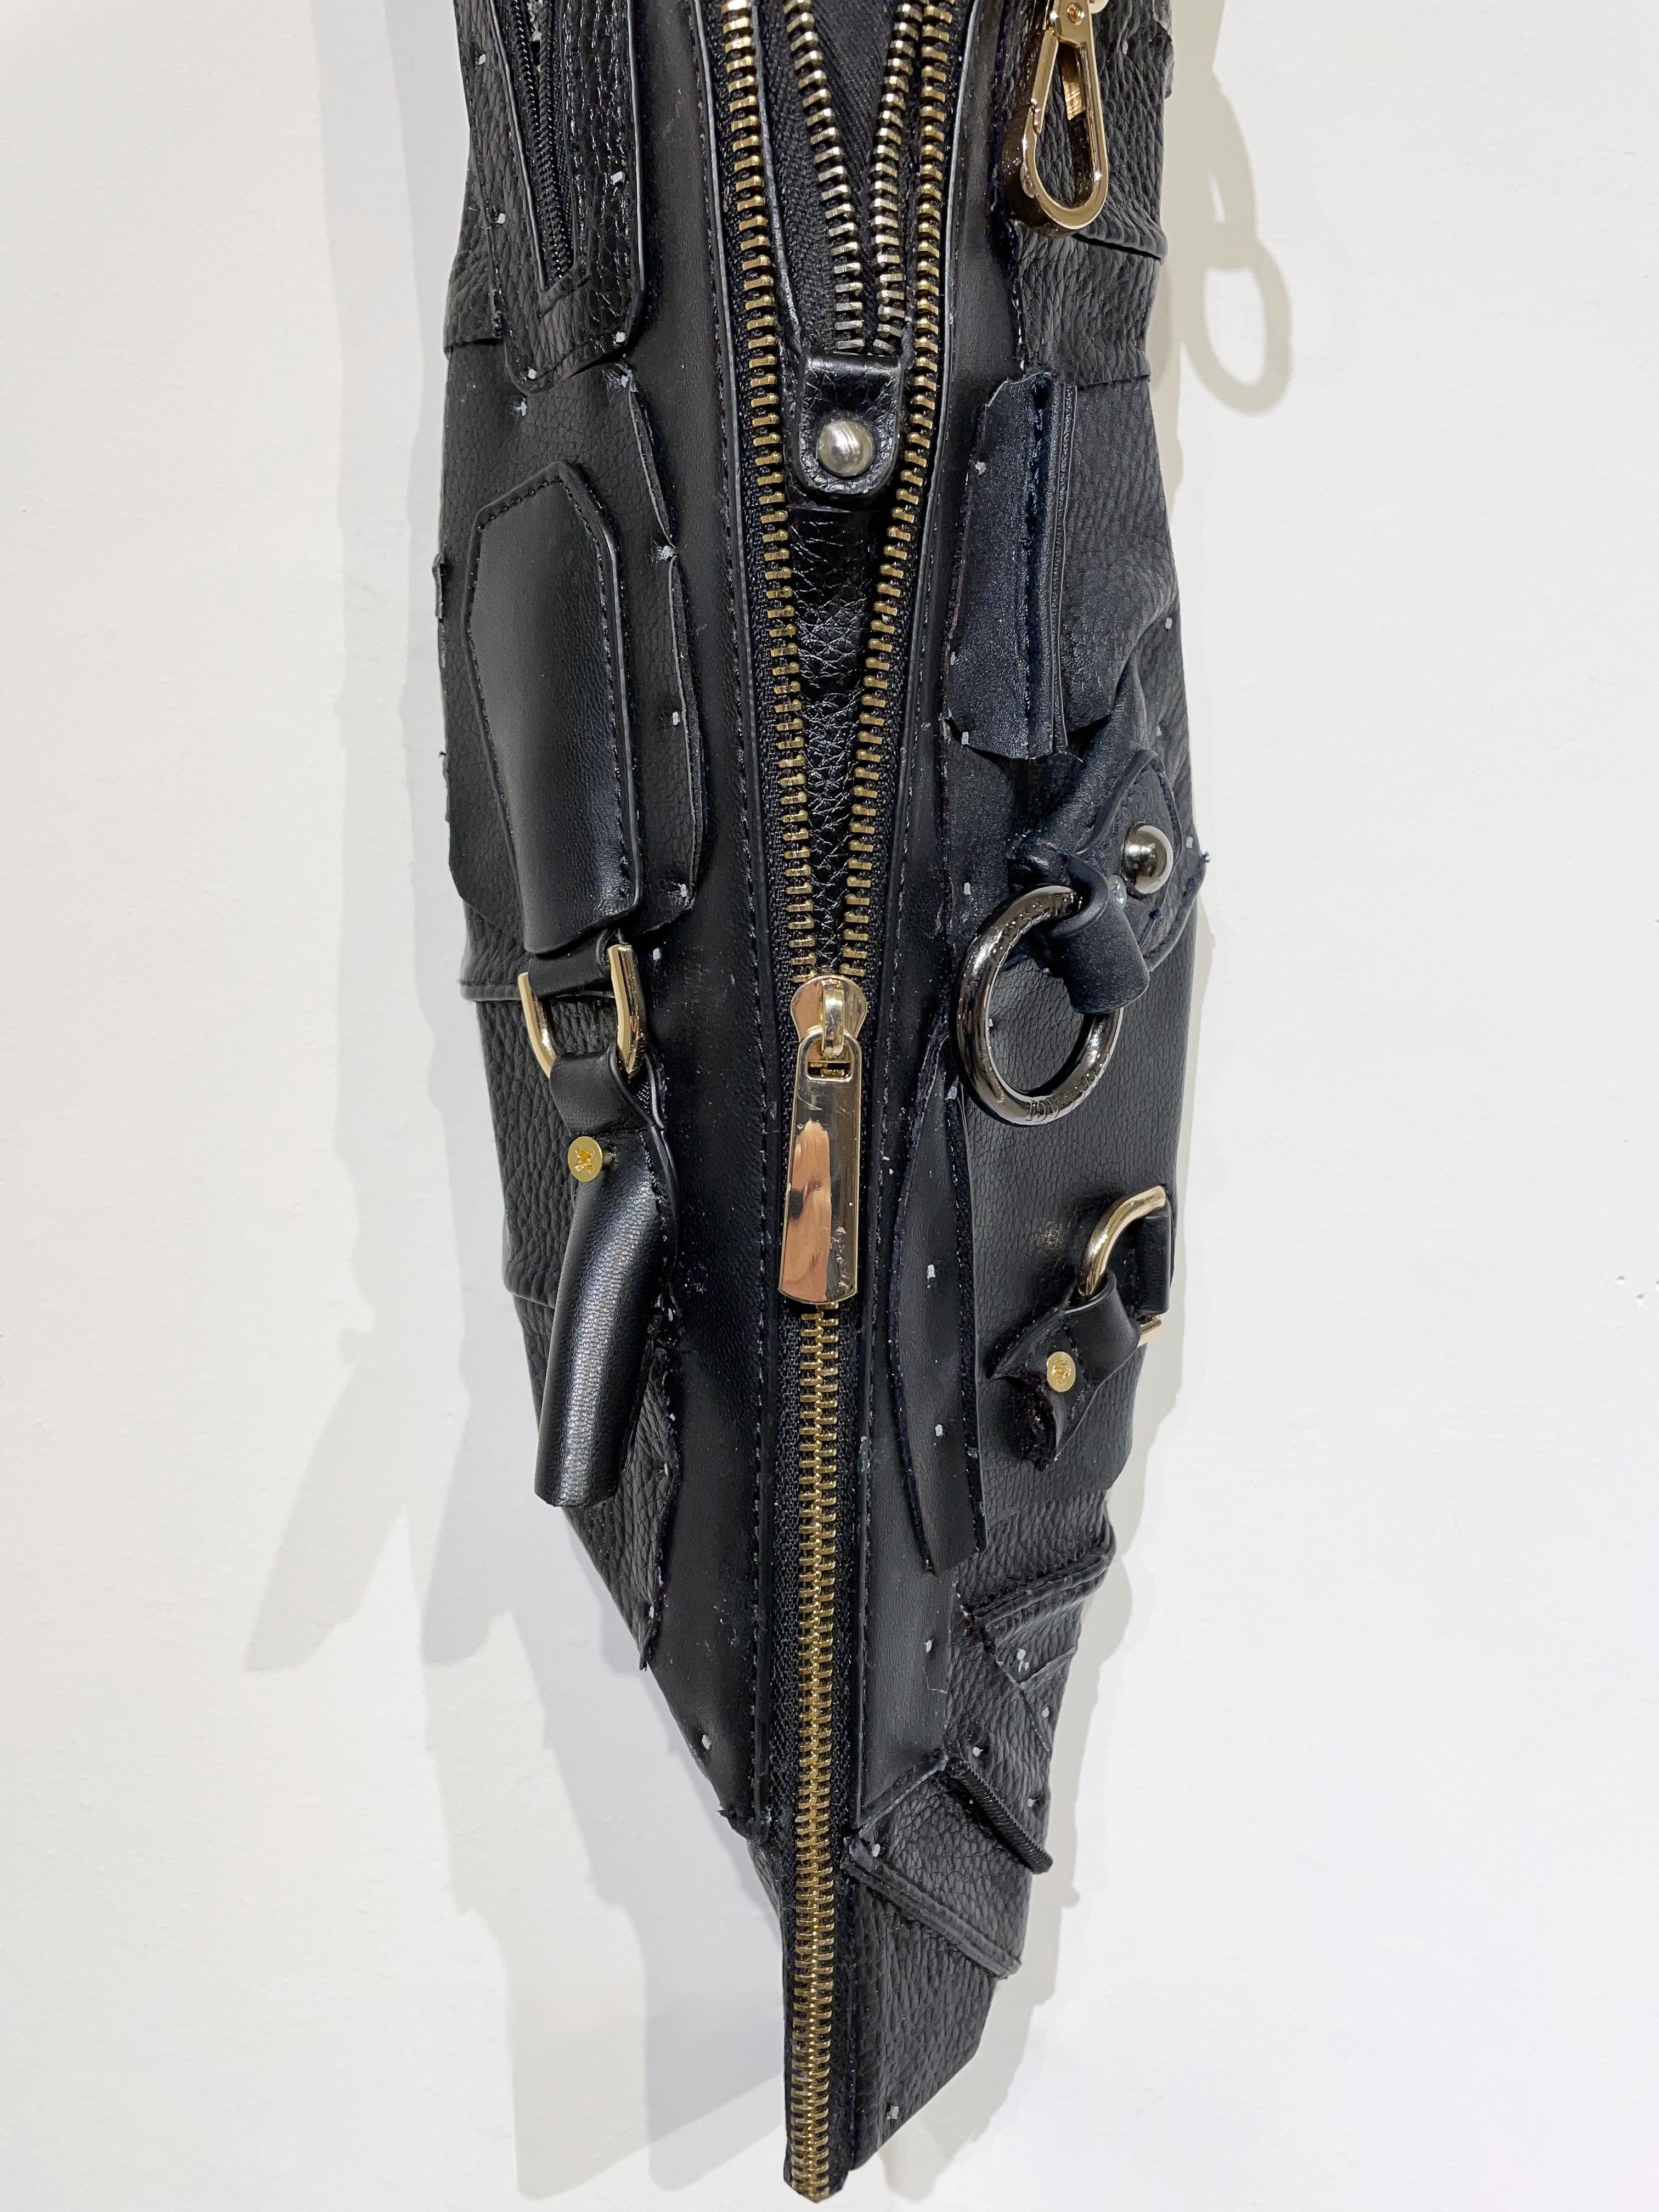 Linda Stein, Twilight Protector 1226 Contemporary Mixed Media Leather Sculpture  For Sale 8